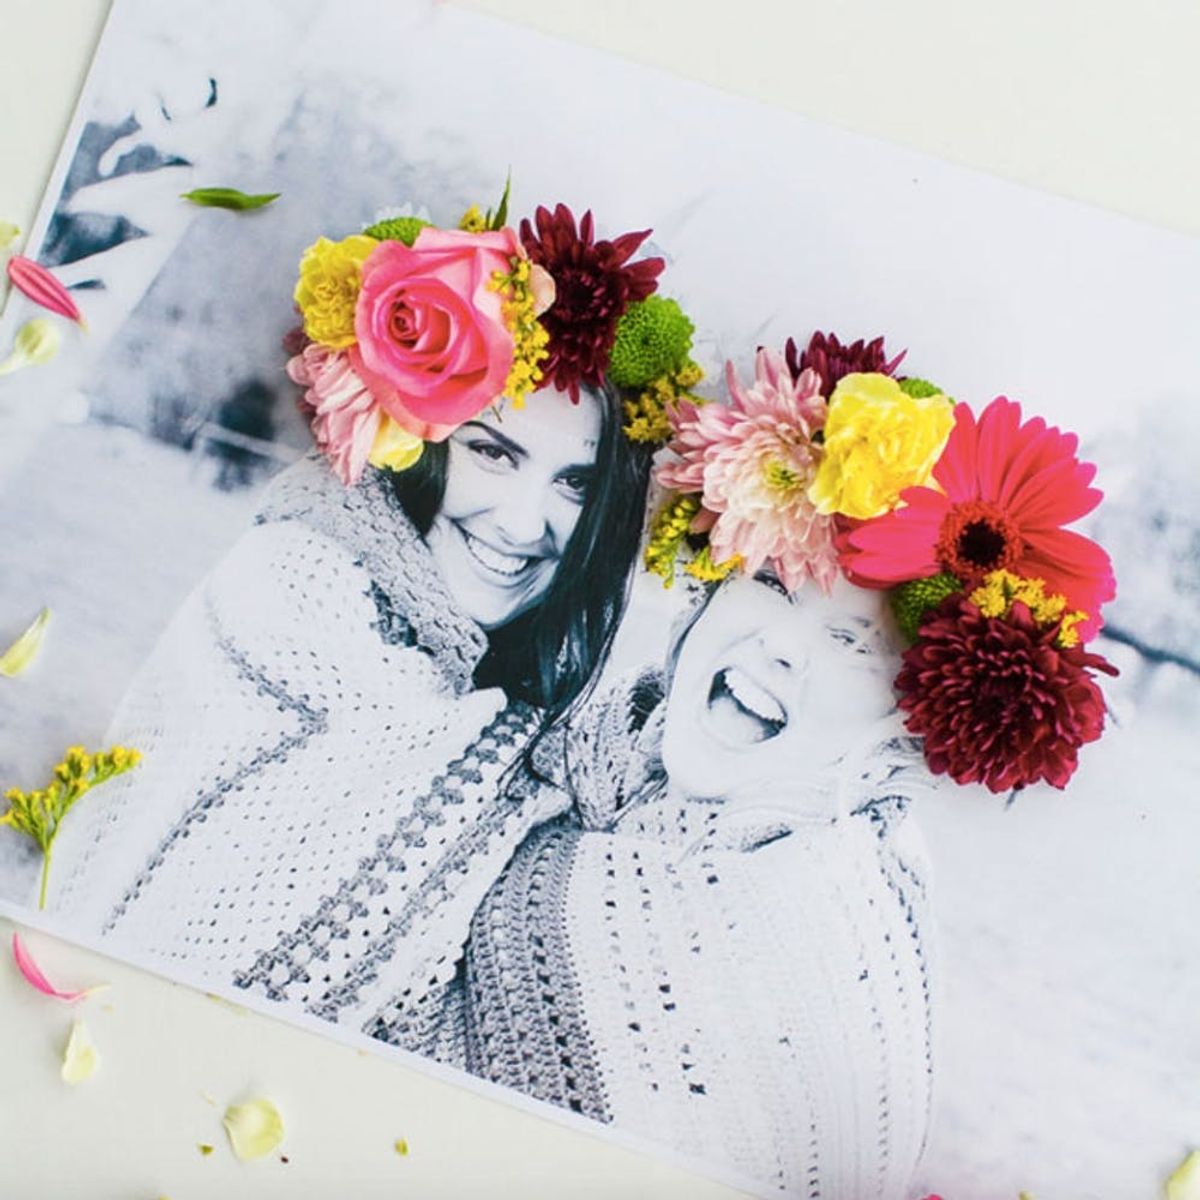 17 DIY Photo Gifts for Everyone on Your List